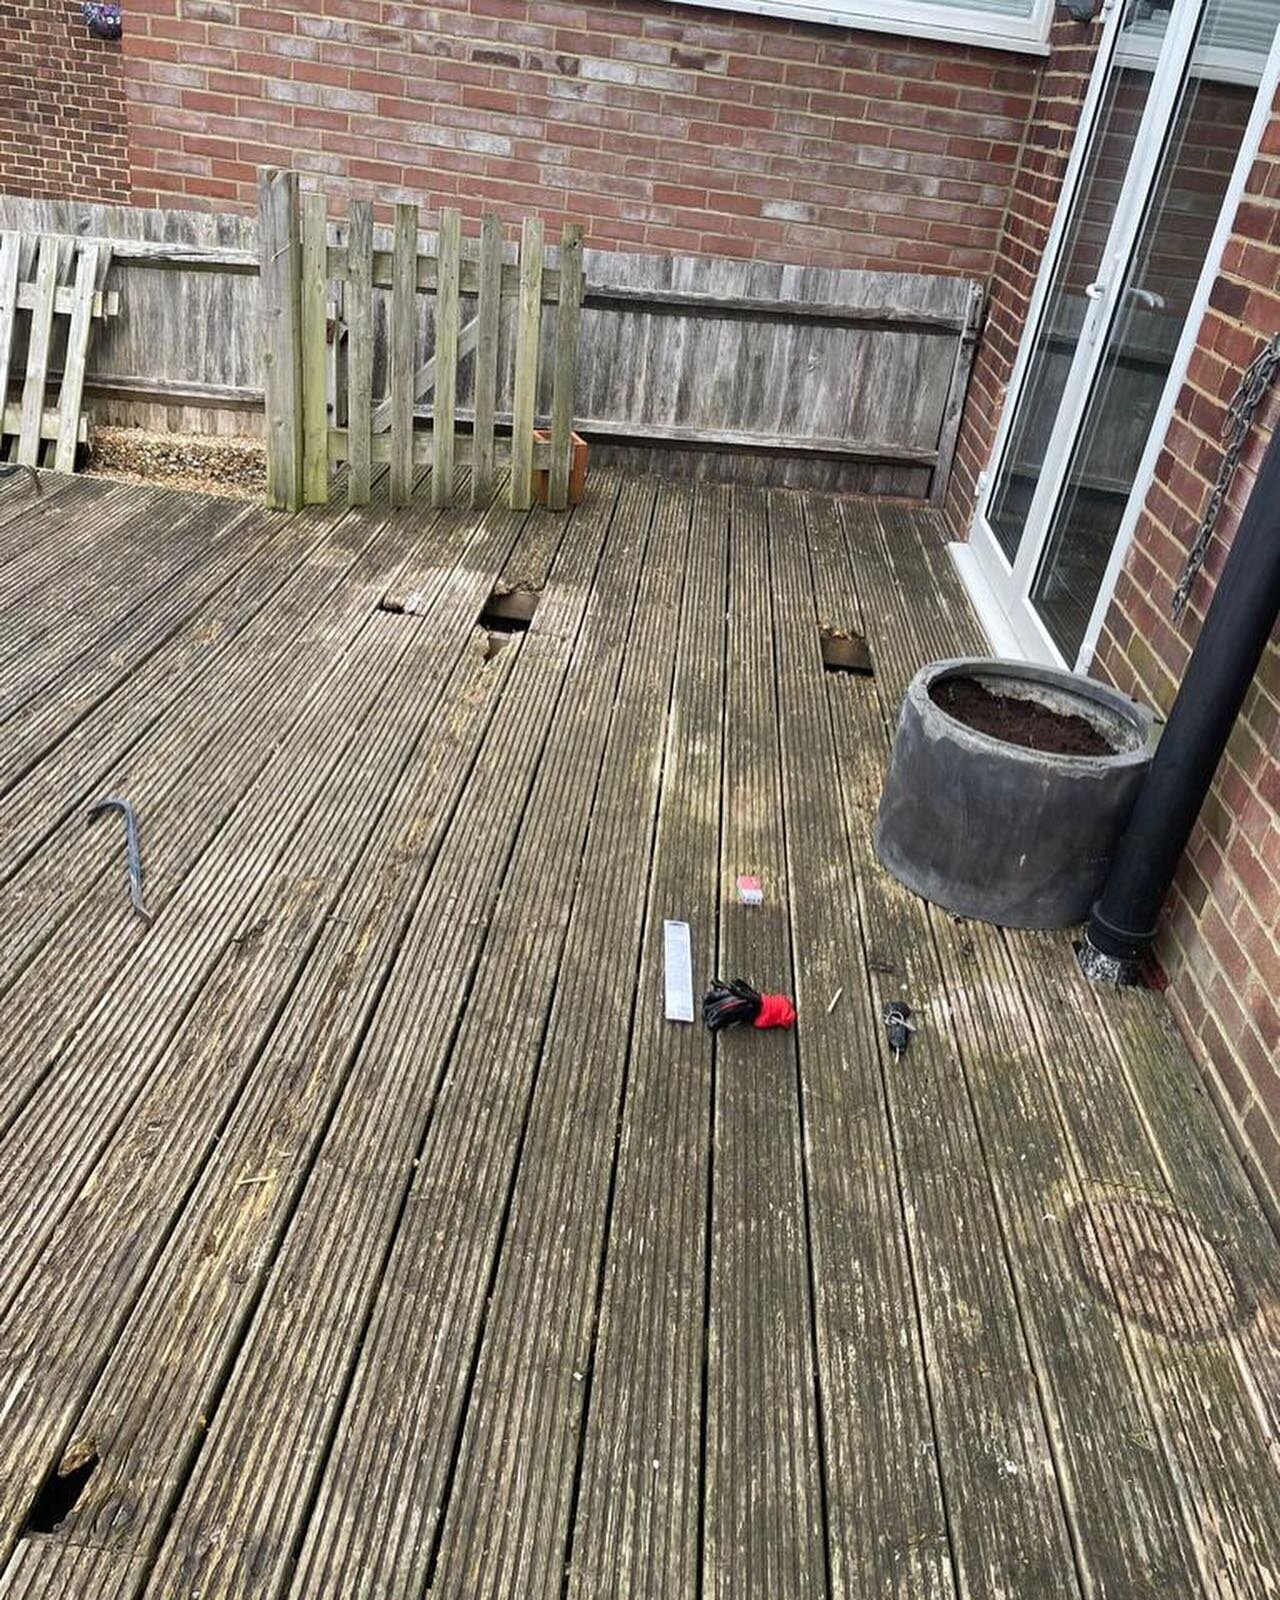 BEFORE &amp; AFTER - At this property in Eastbourne, we removed the existing decking and reduced for a smaller decking to allow for some grass area. What a difference this makes, we even made small decking wall to enclose. For all your external needs